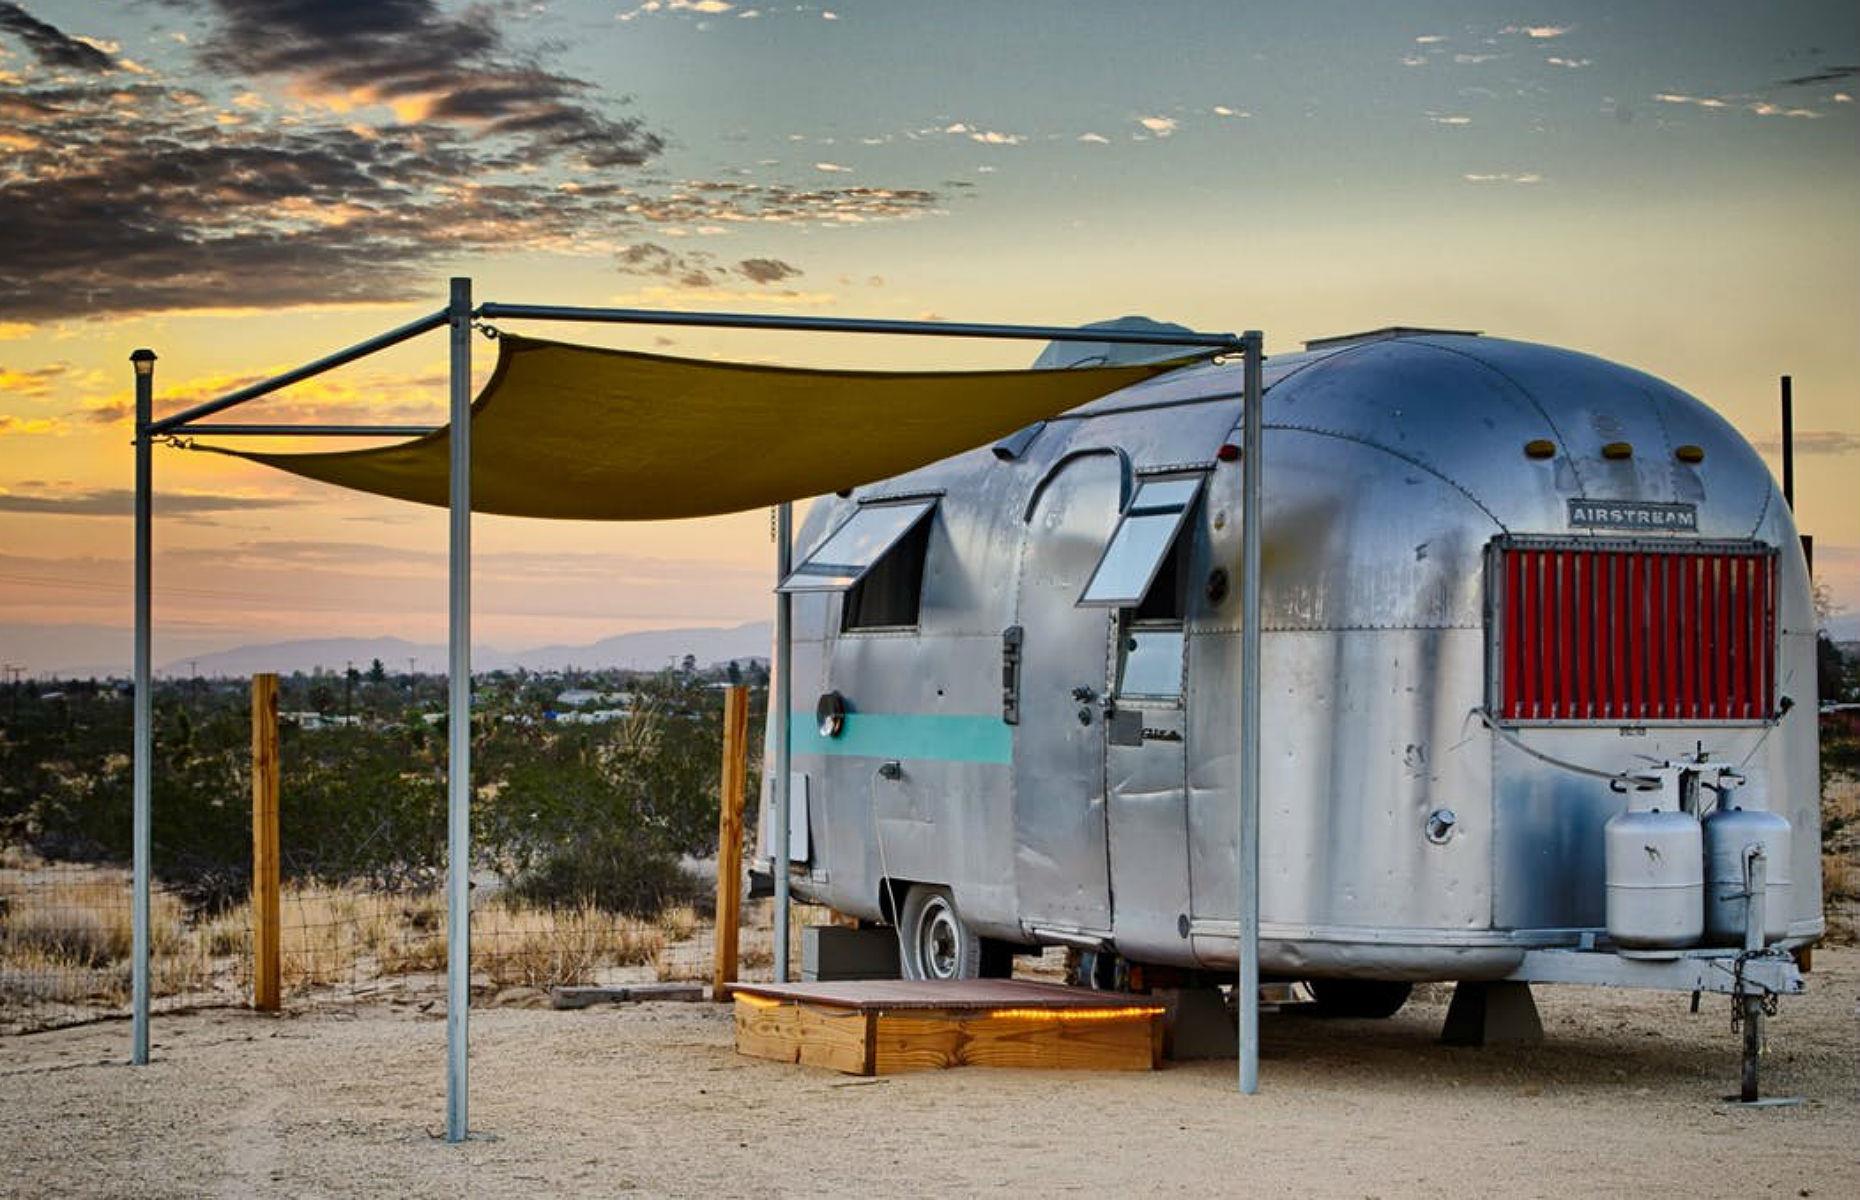 <p>This cute <a href="https://www.coolstays.com/property/kates-lazy-desert-airstreams/16867">Tiki Airstream</a> is 26 feet long and has one full bed, a bathroom and a small kitchenette.</p>  <p>The overhauled Airstream has been designed to keep its owners cosy and comfortable, with air conditioning fitted for the warmer months and a space heater for winter. </p>